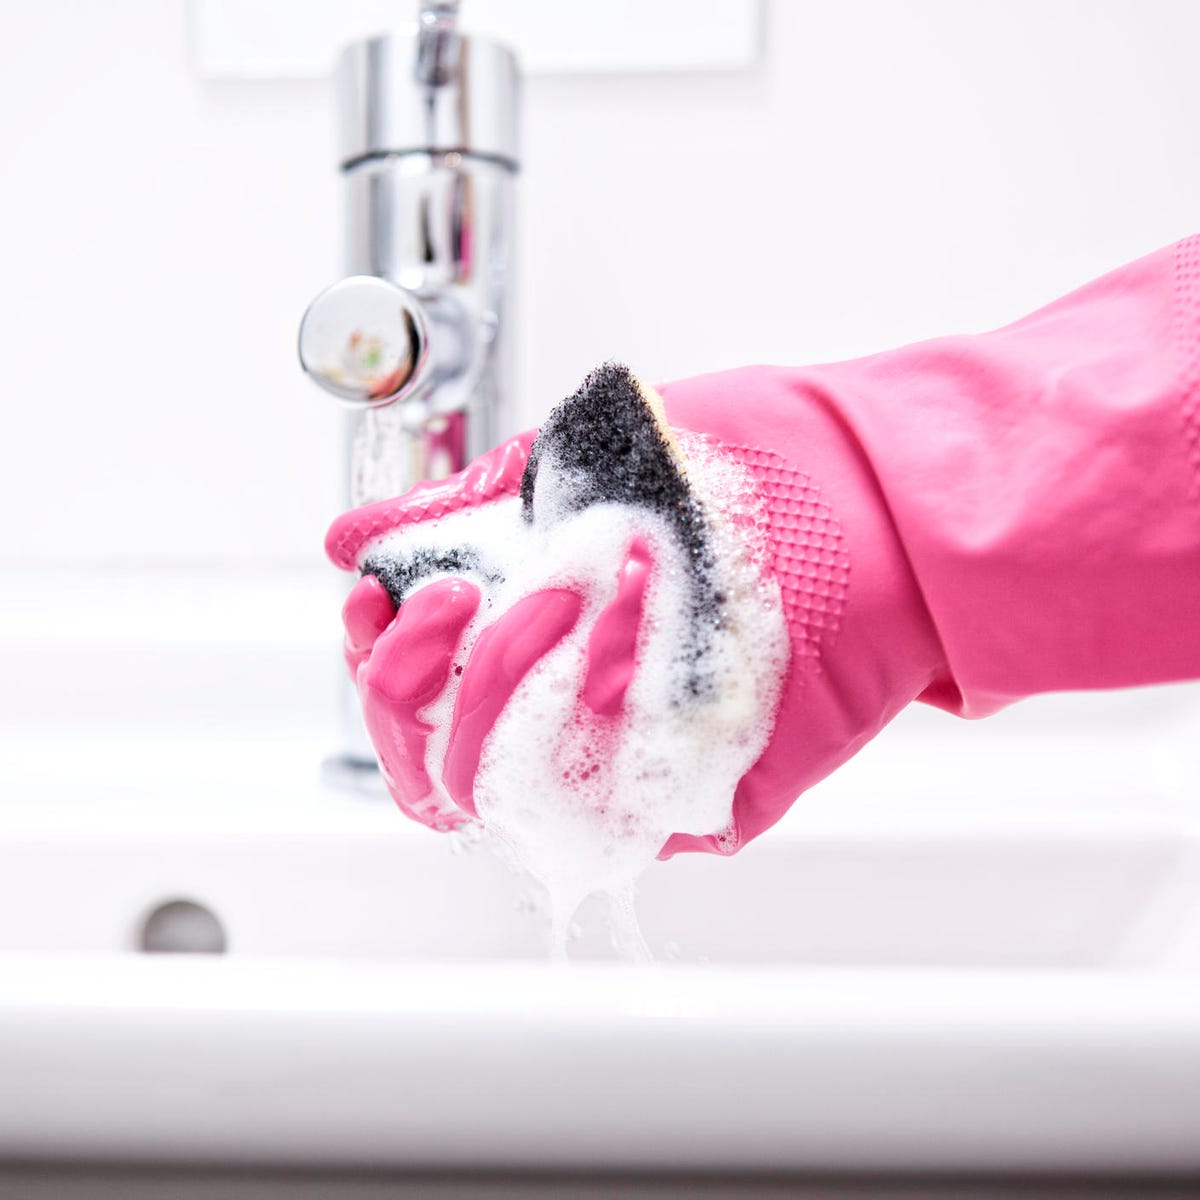 How to Quickly Clean Your Bathroom: All You Should Know